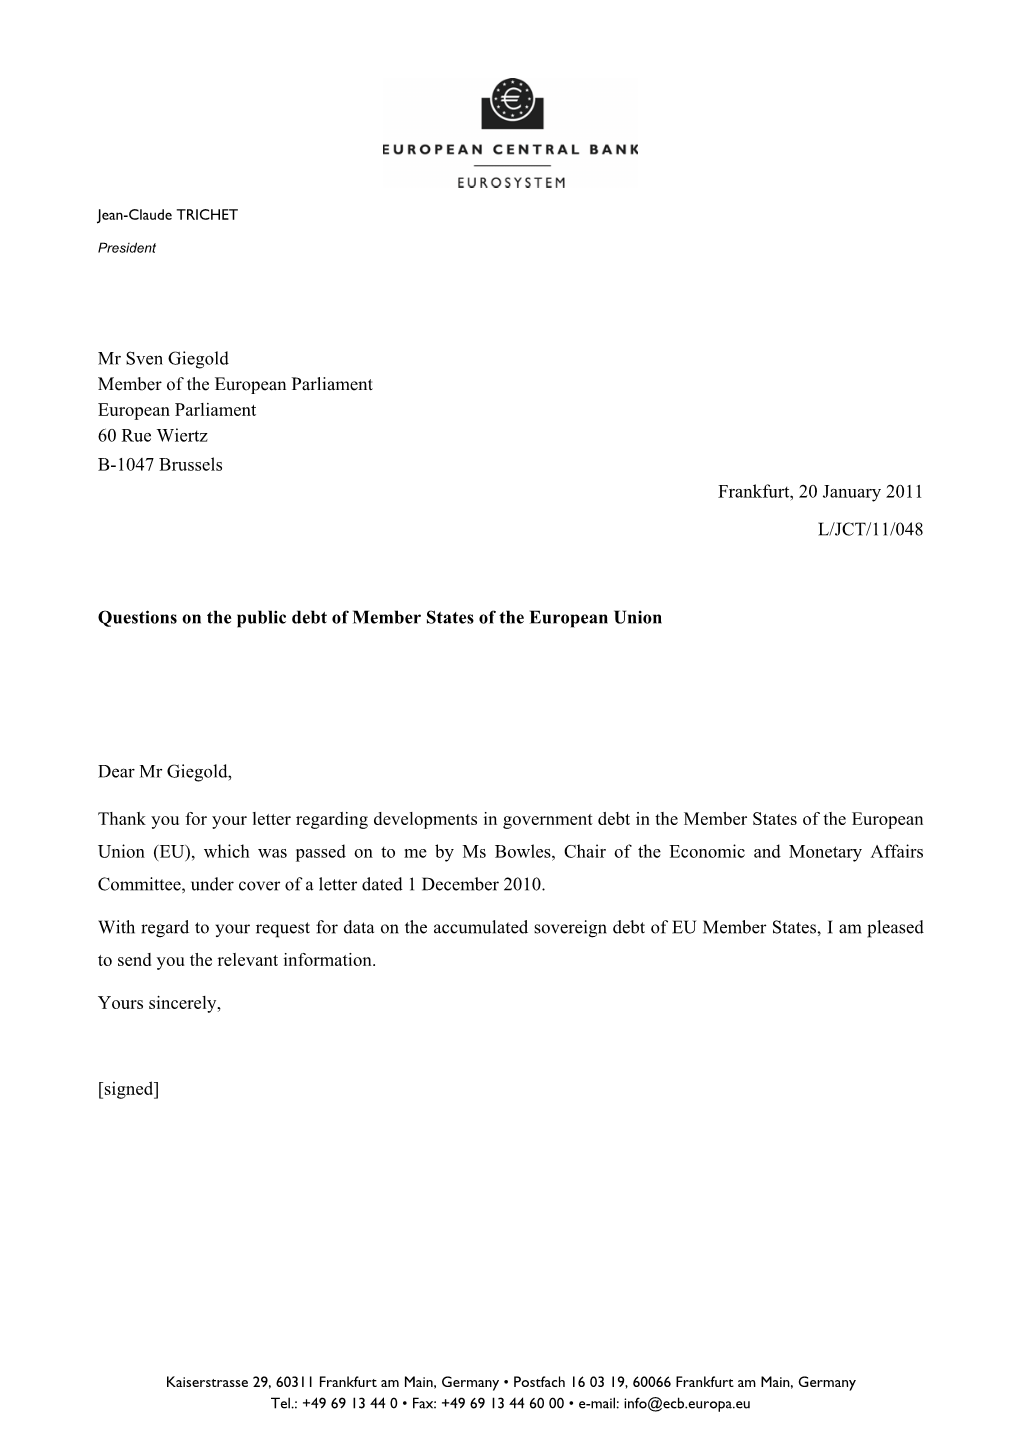 Letter from the ECB President to Mr Sven Giegold, Member of the European Parliament